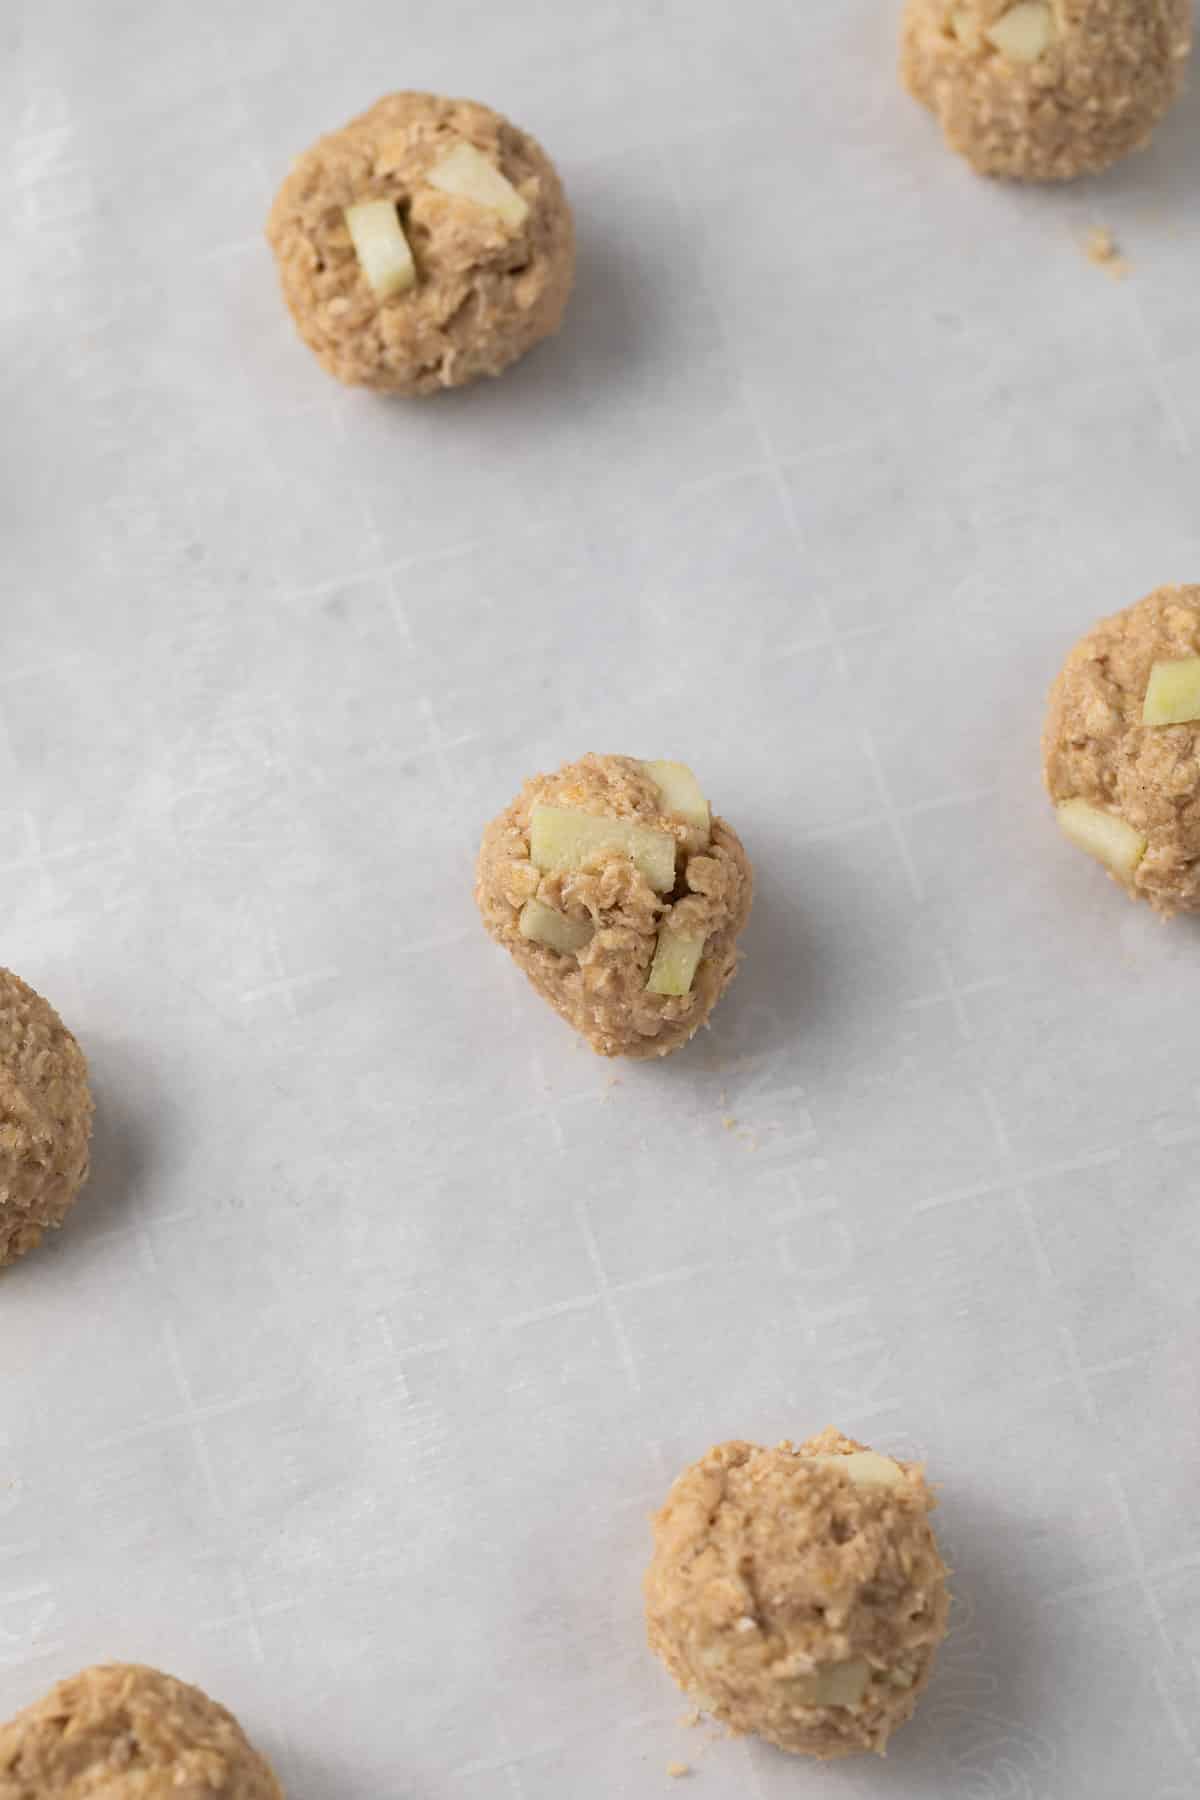 Unbaked apple oatmeal cookies on a baking sheet.